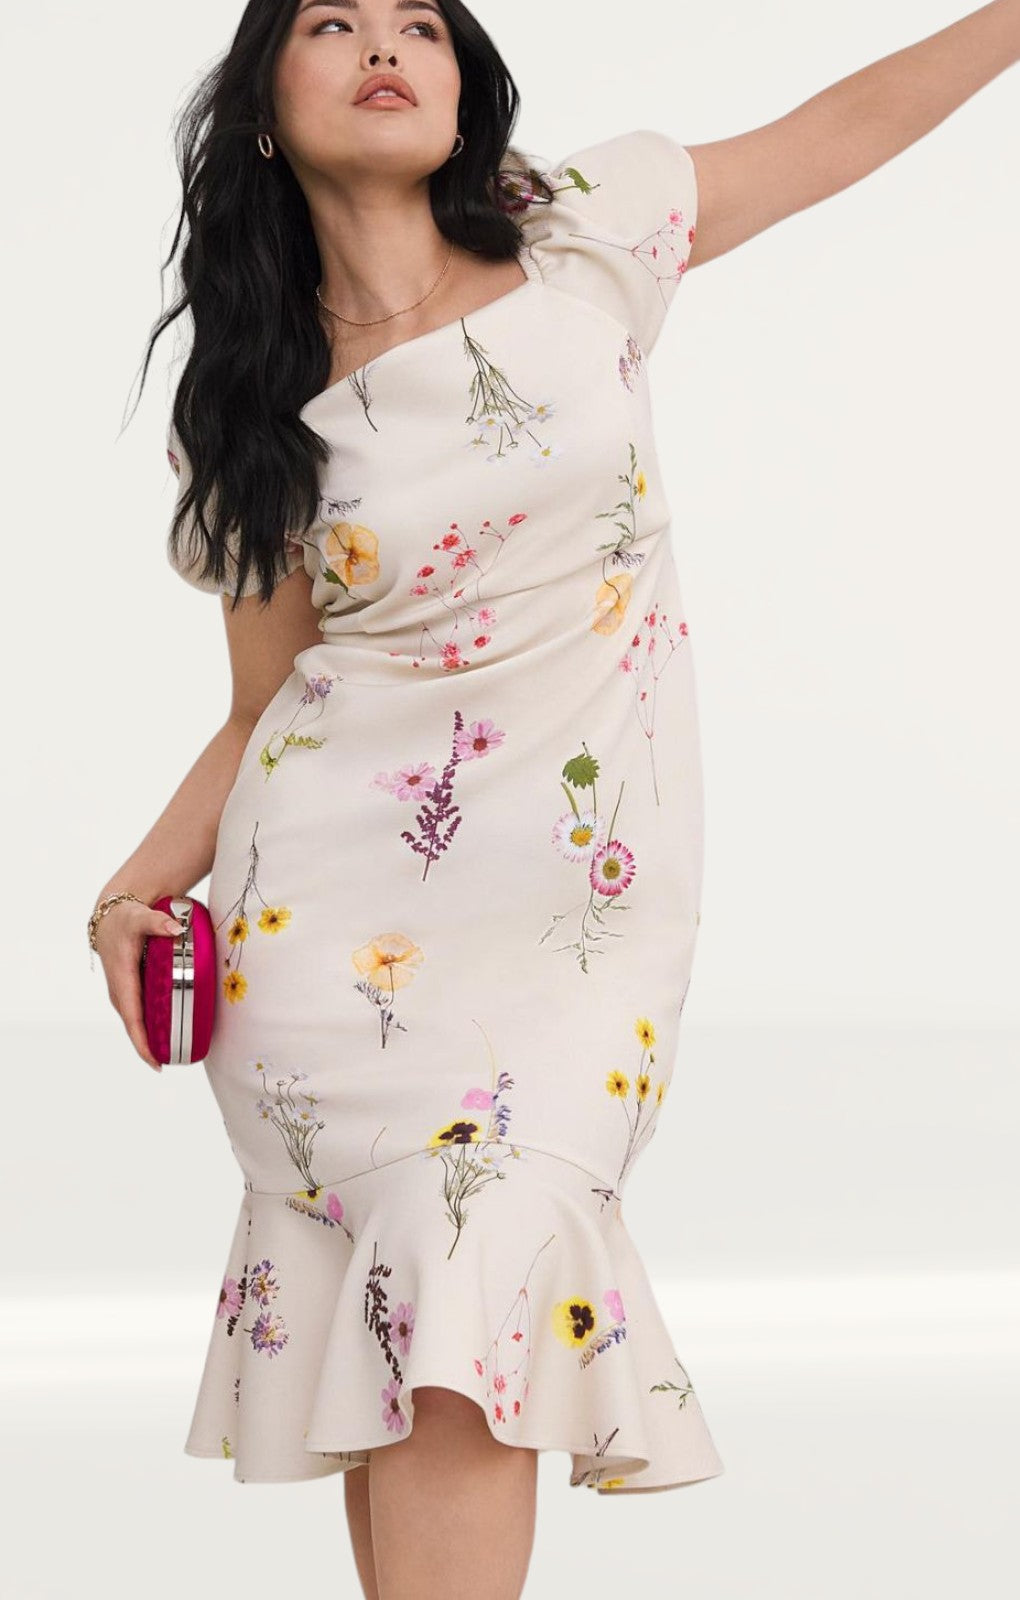 Simply Be Ivory Floral Bodycon Dress product image